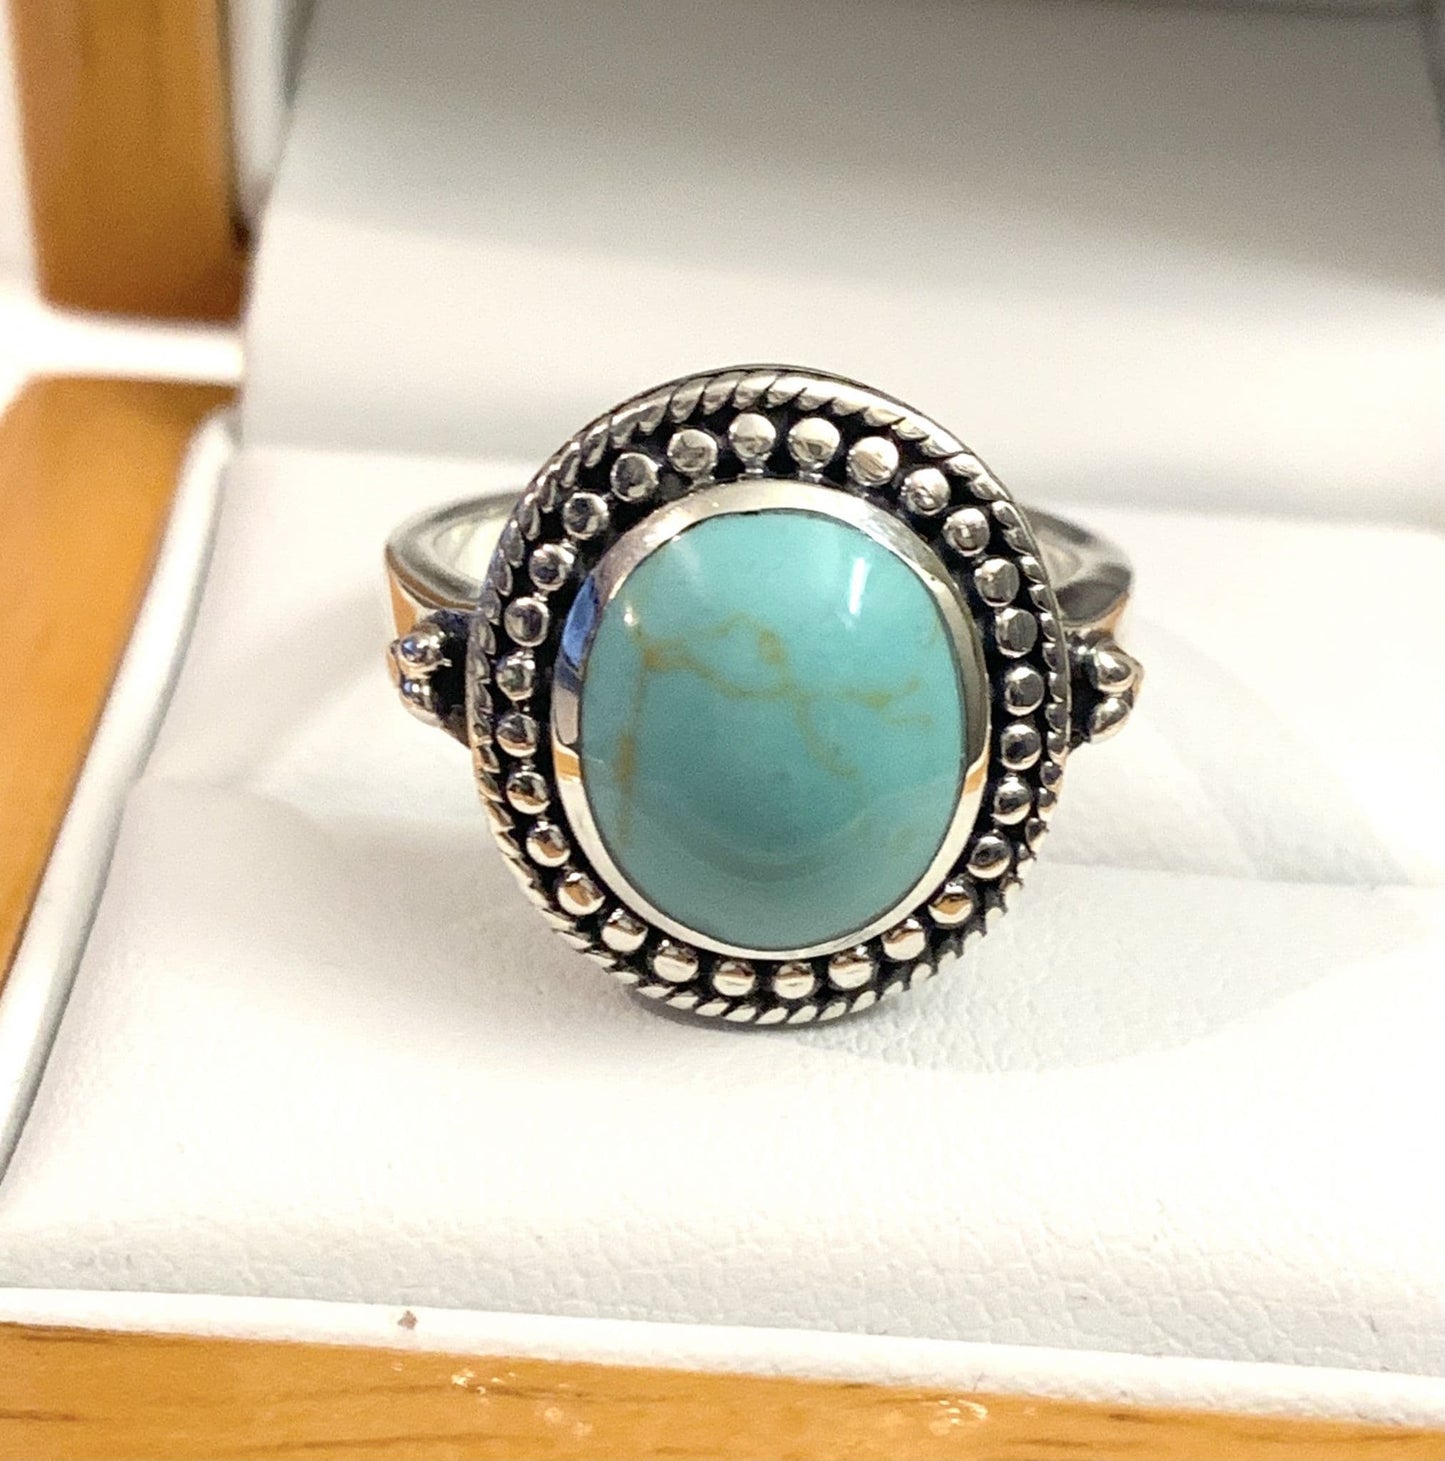 Large Oval Blue Turquoise Sterling Silver Ring With A Bobble And Rope Edge Design